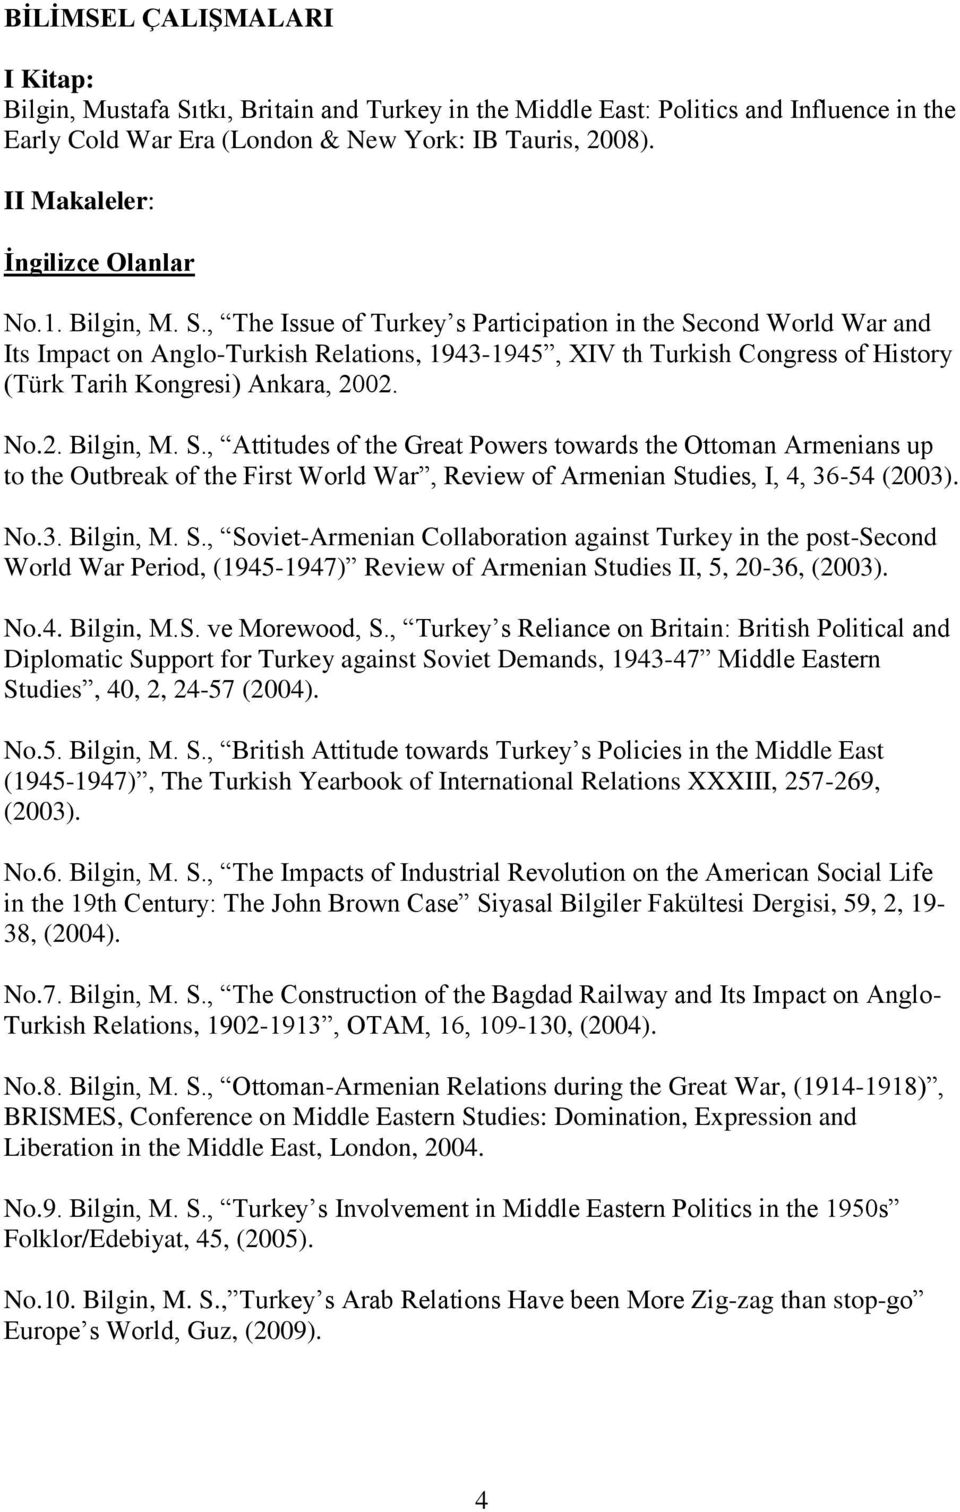 , The Issue of Turkey s Participation in the Second World War and Its Impact on Anglo-Turkish Relations, 1943-1945, XIV th Turkish Congress of History (Türk Tarih Kongresi) Ankara, 2002. No.2. Bilgin, M.